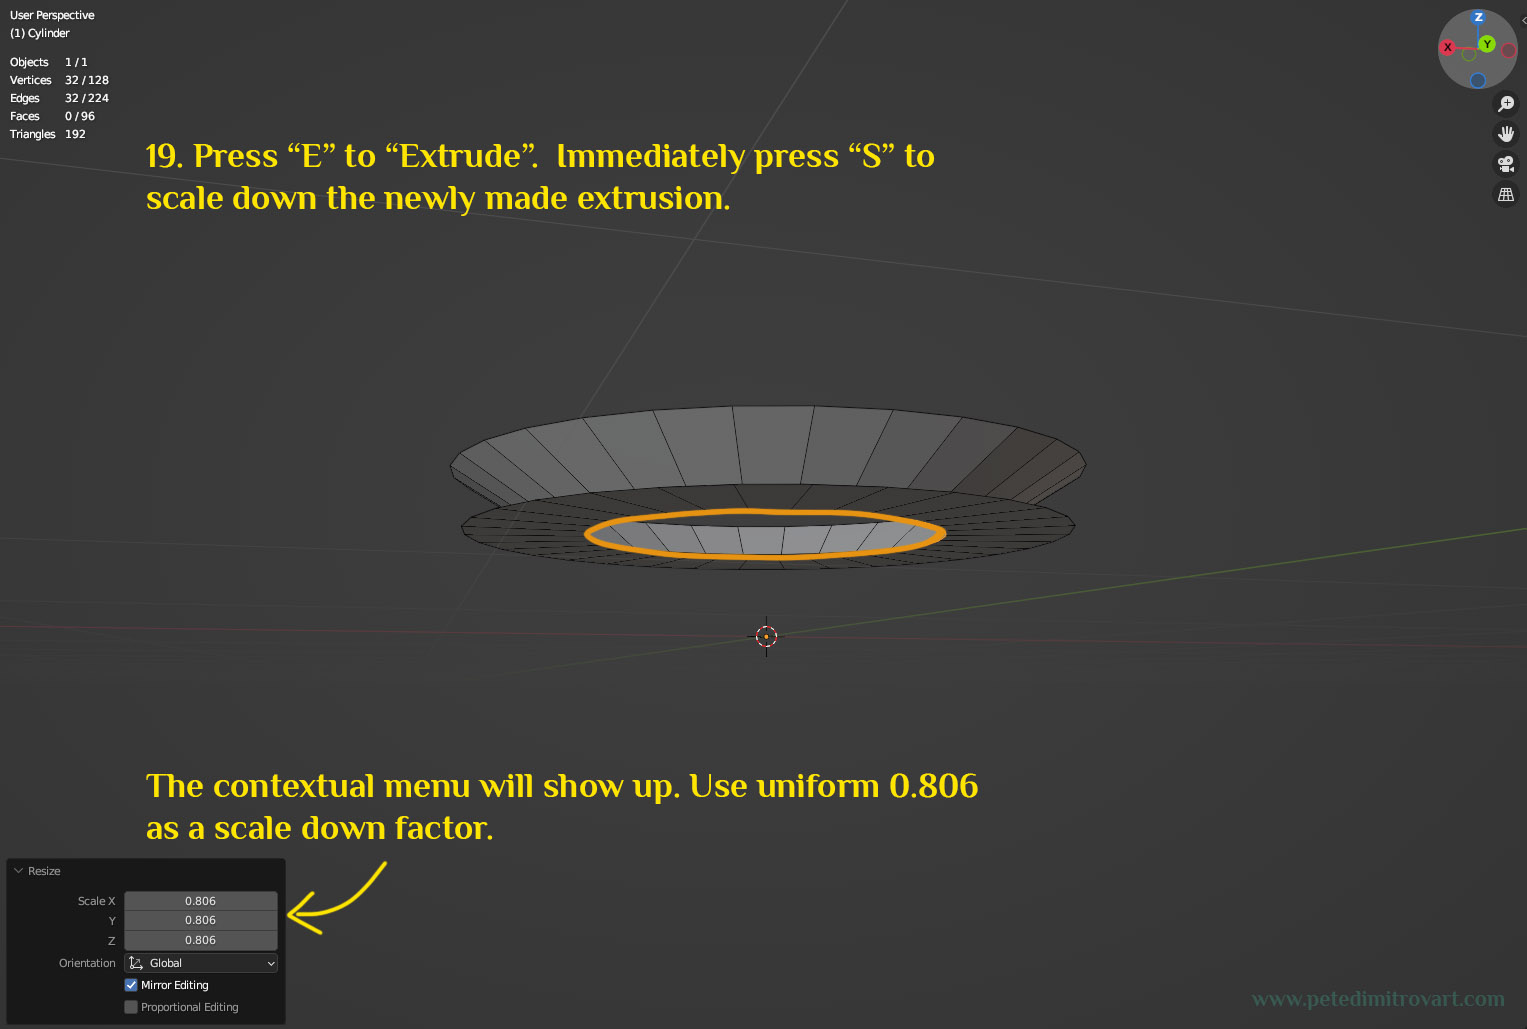 Blender screenshot, showing the mesh from profile. The orange edge loop in the middle is scaled down by 0.806. The yellow text in the picture is transcribed in the paragraph above.